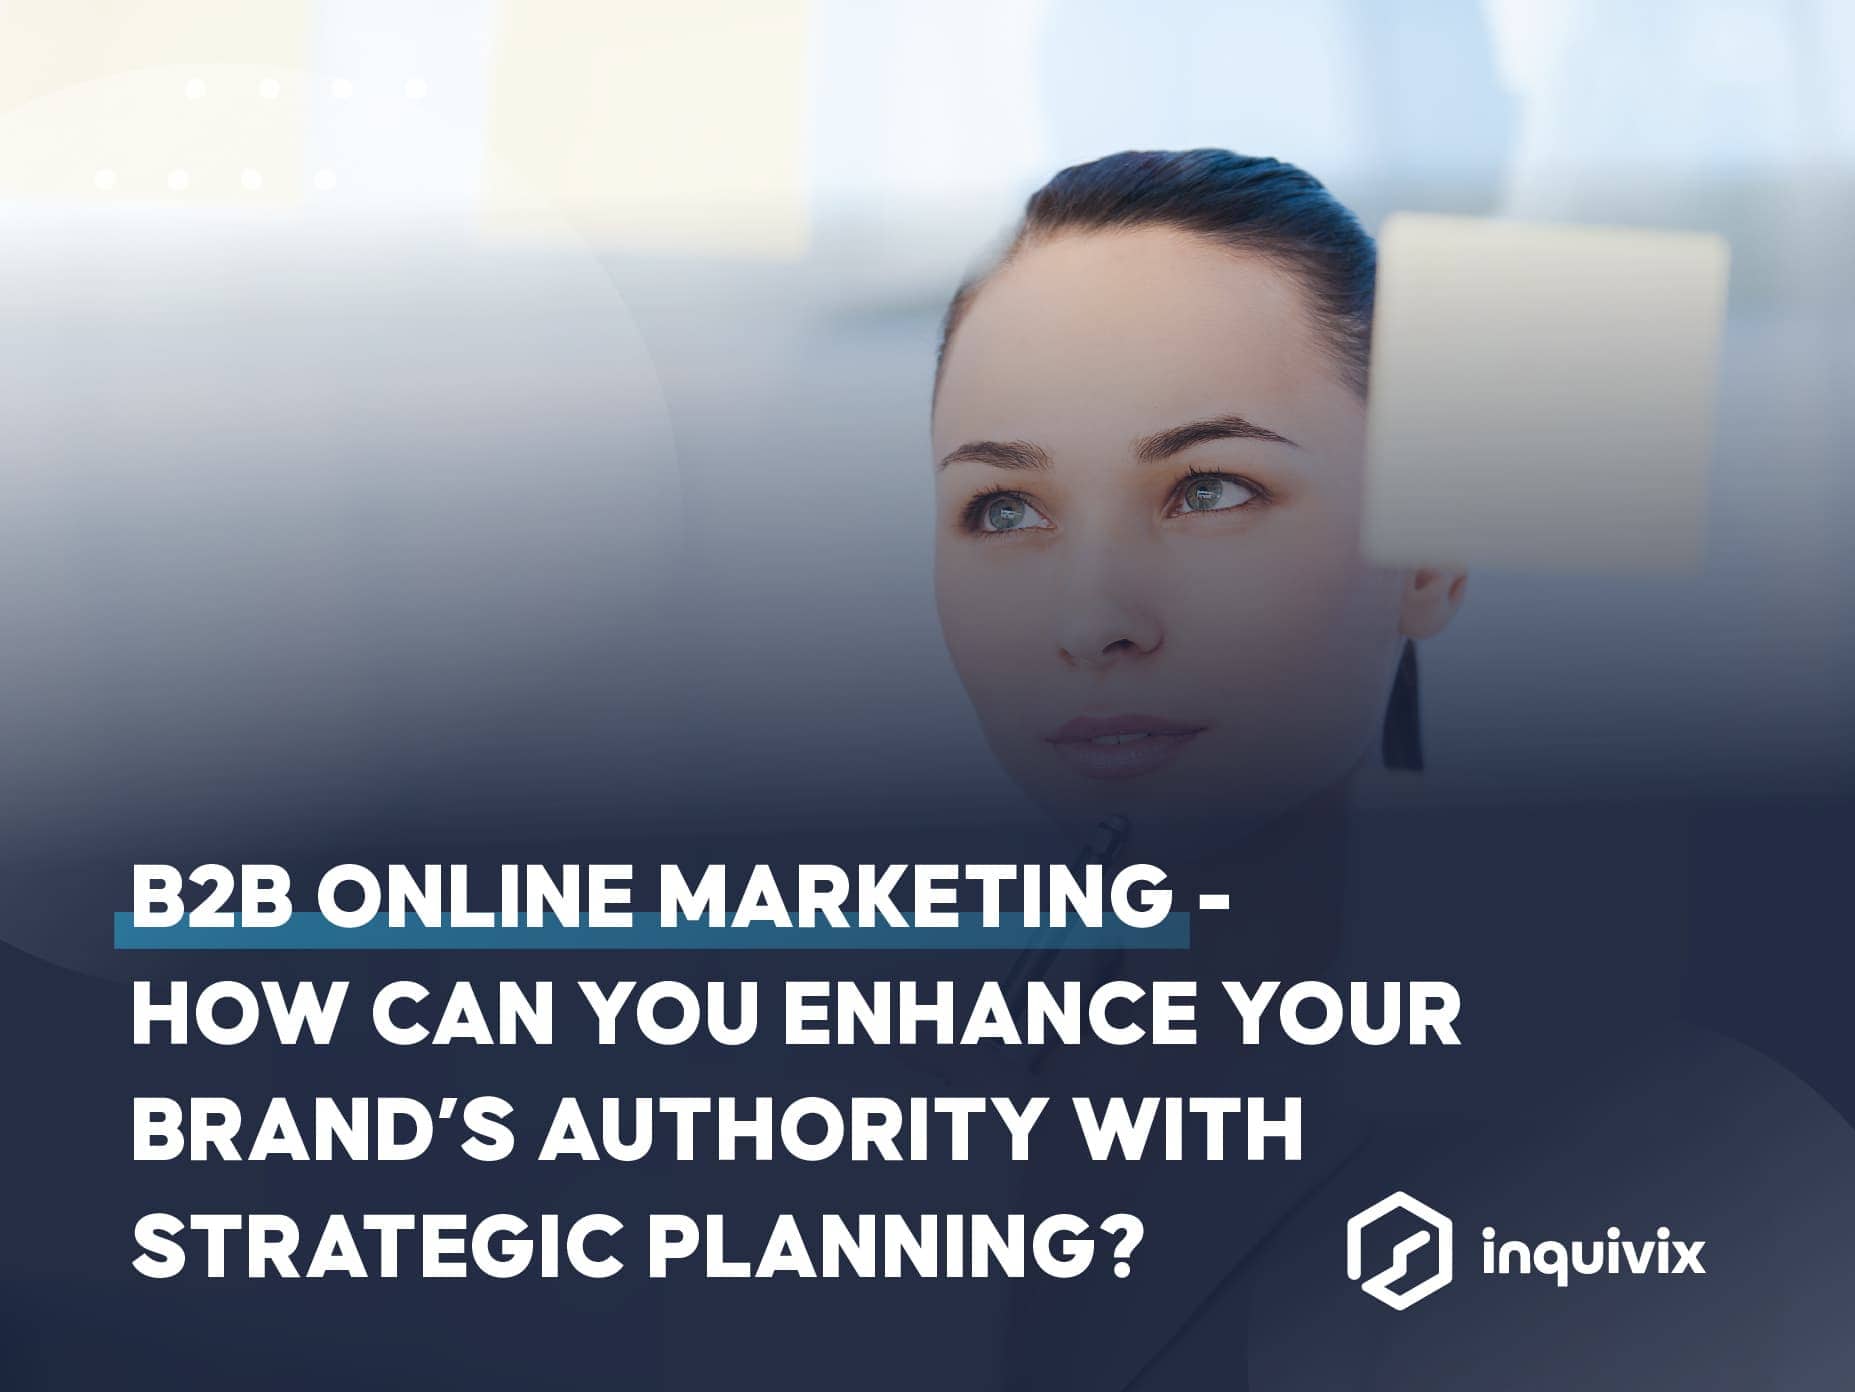 HOW CAN YOU ENHANCE YOUR BRAND’S AUTHORITY WITH STRATEGIC PLANNING